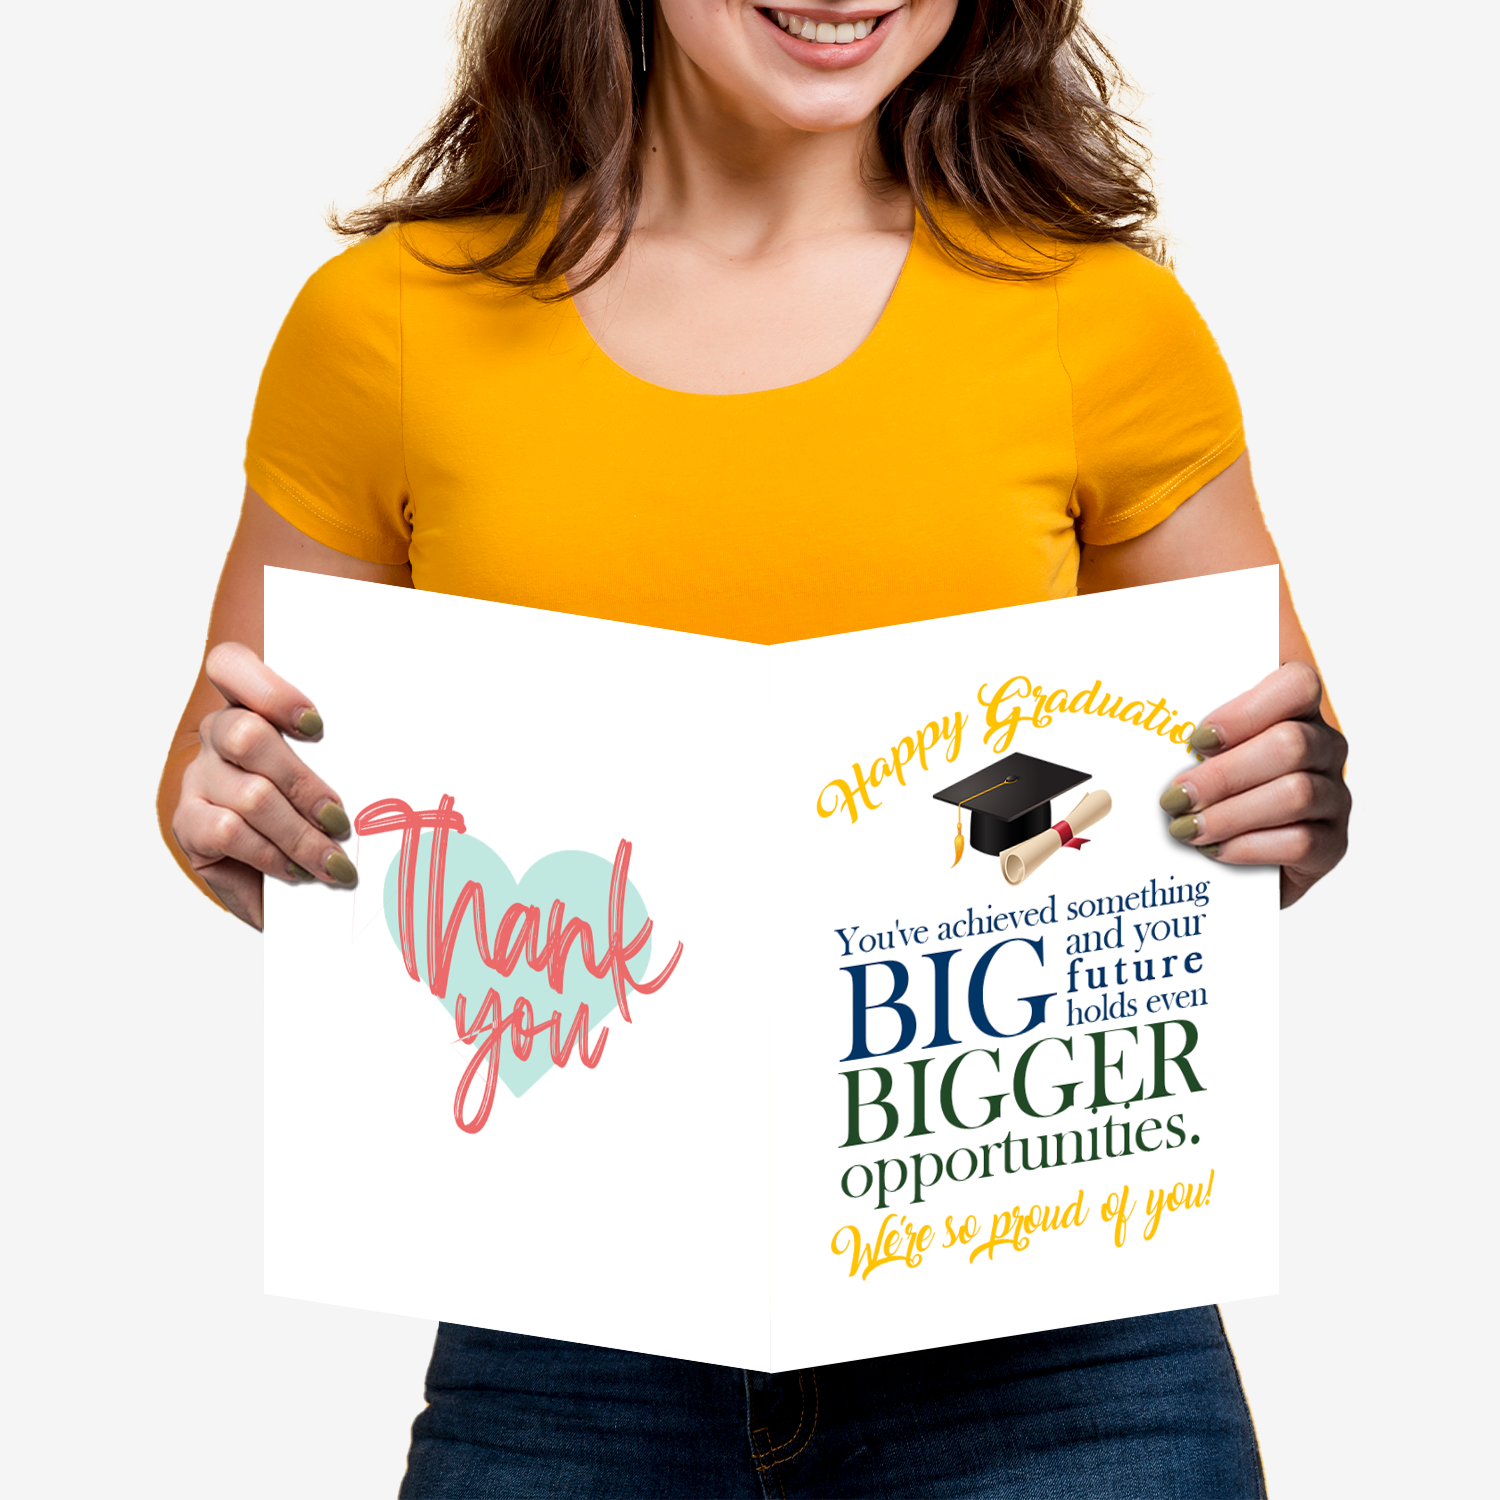 A Big Happy Graduation Greeting Cards with Envelopes – 8.5" x 11" Jumbo Size Thank You Cards for Large Groups and Teams  – 2 per Pack